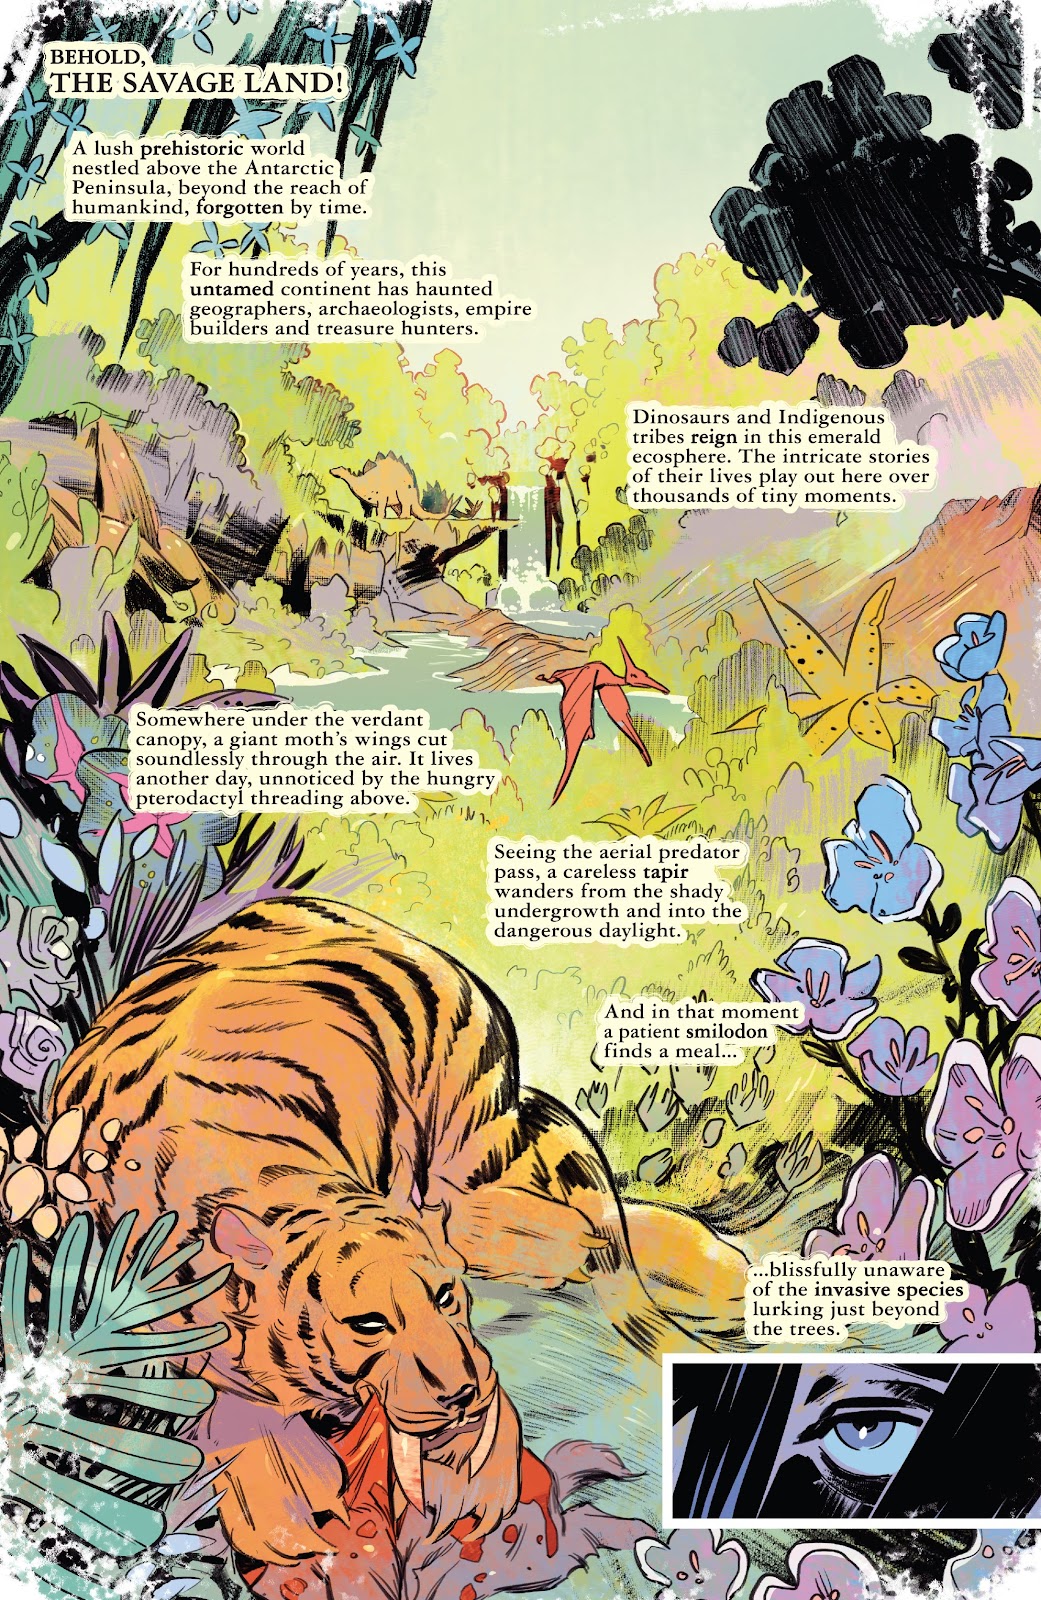 Ka-Zar Lord of the Savage Land issue 1 - Page 2